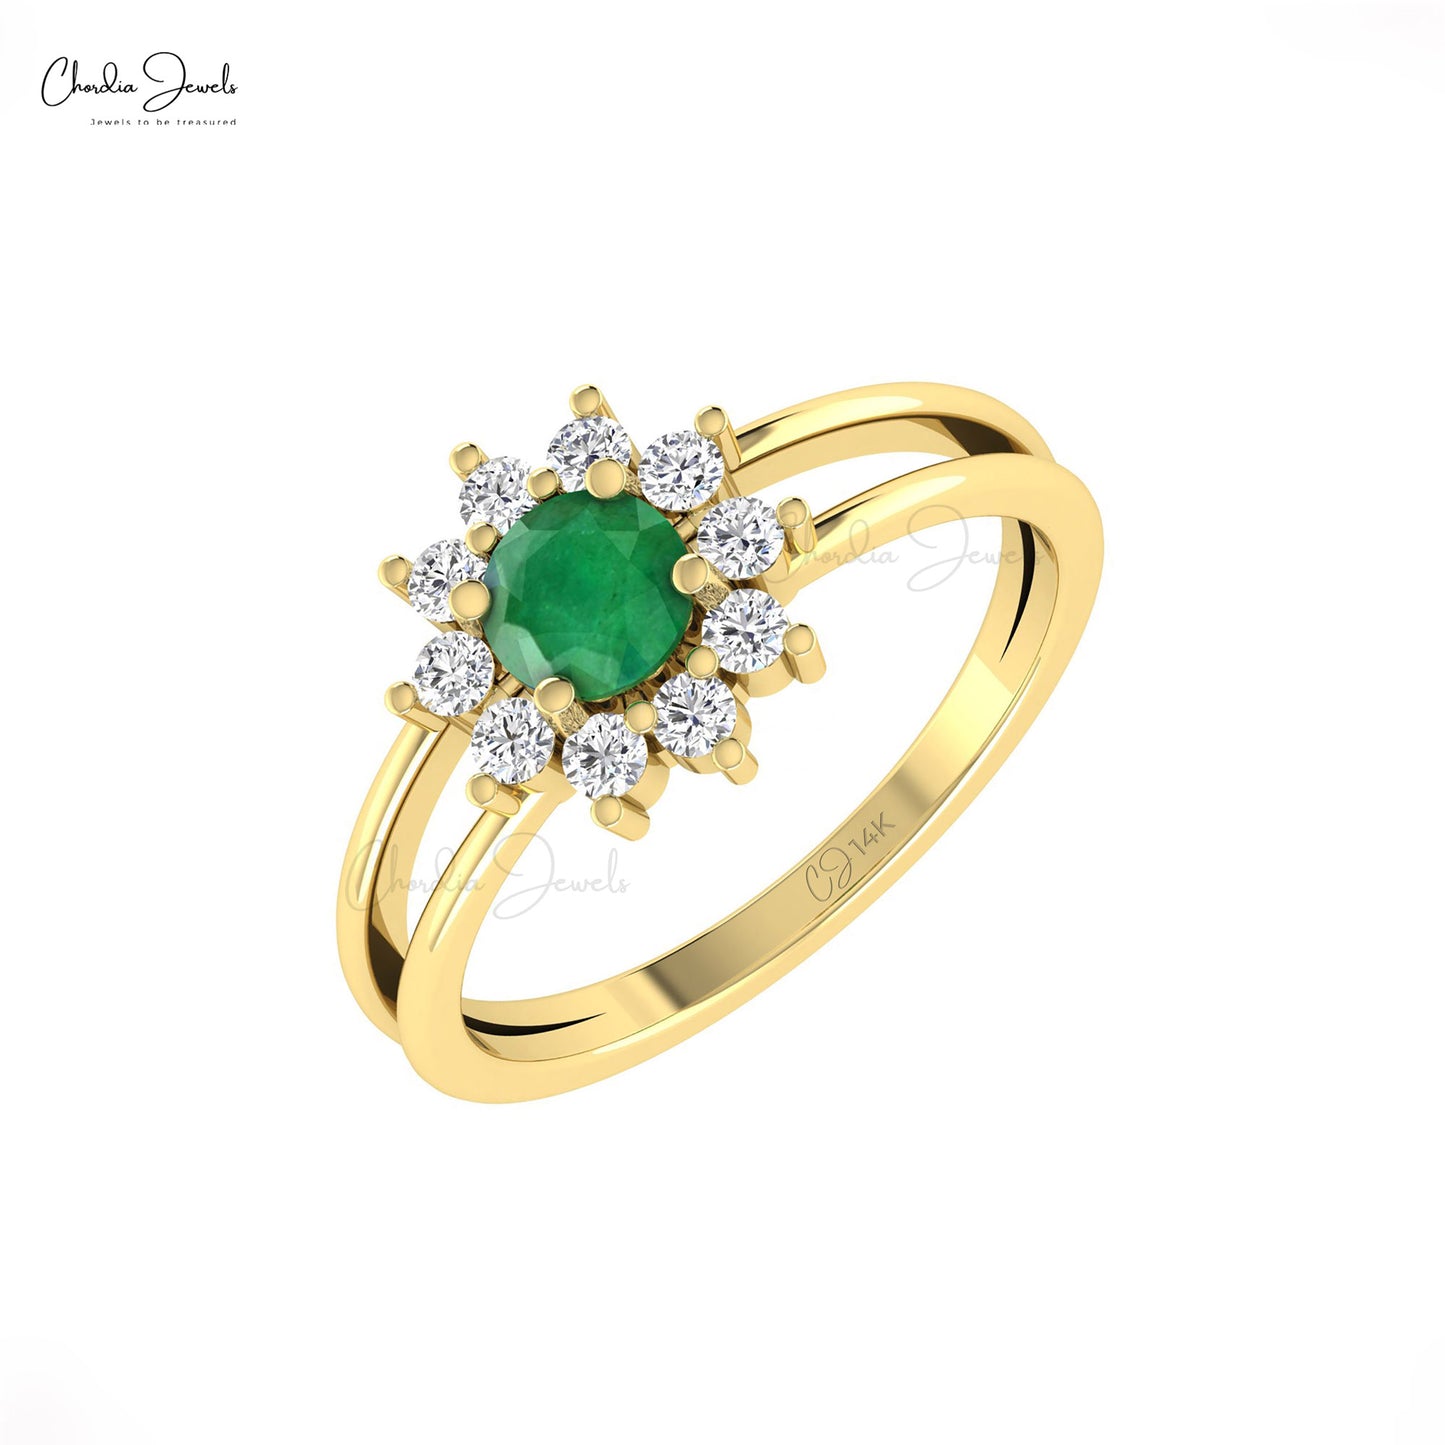 Complete your overall look with our may birthstone ring.